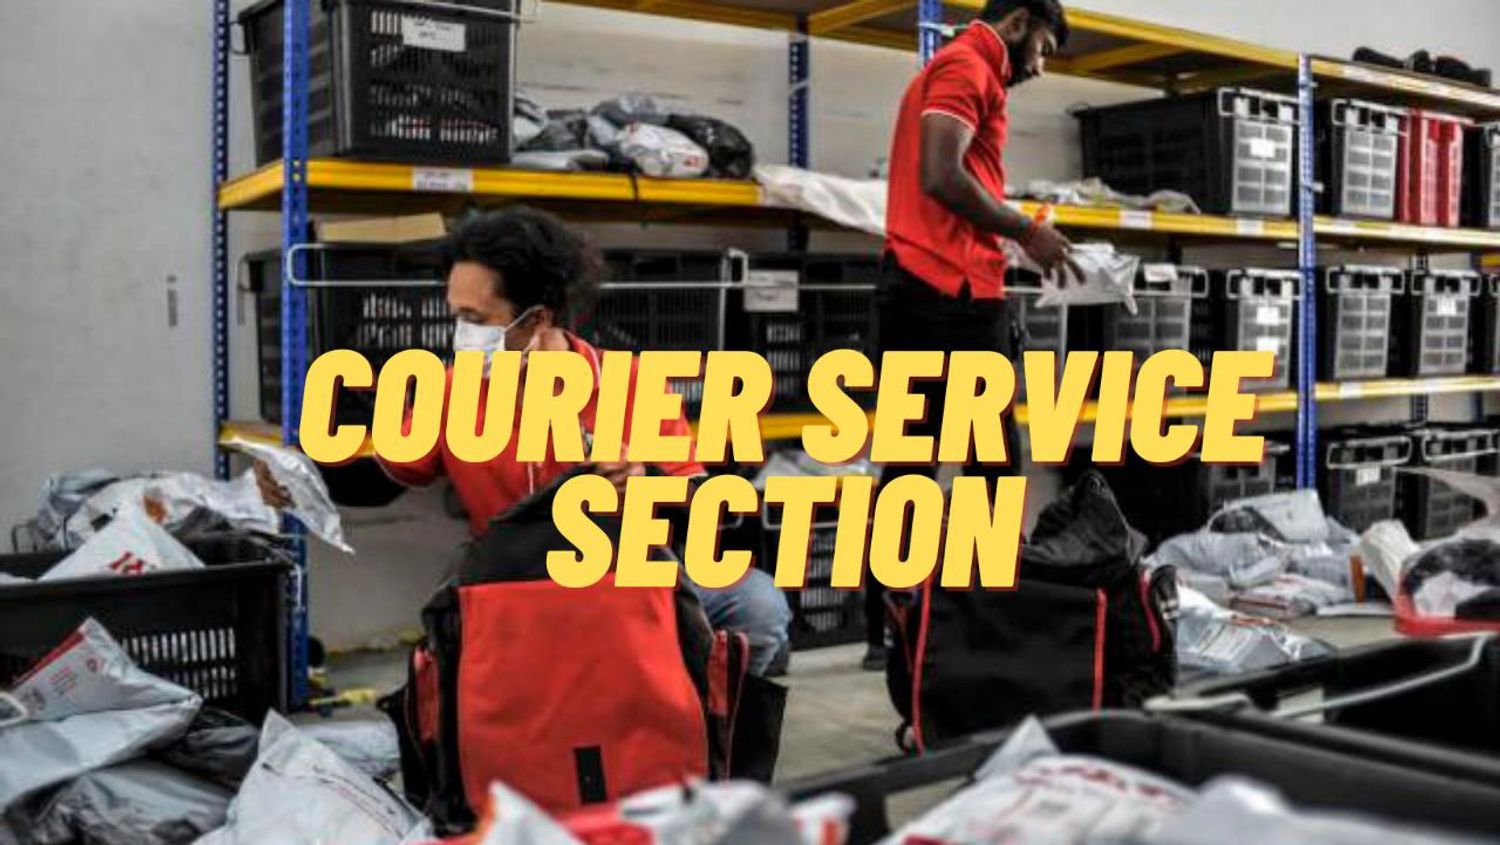 Courier Service Section